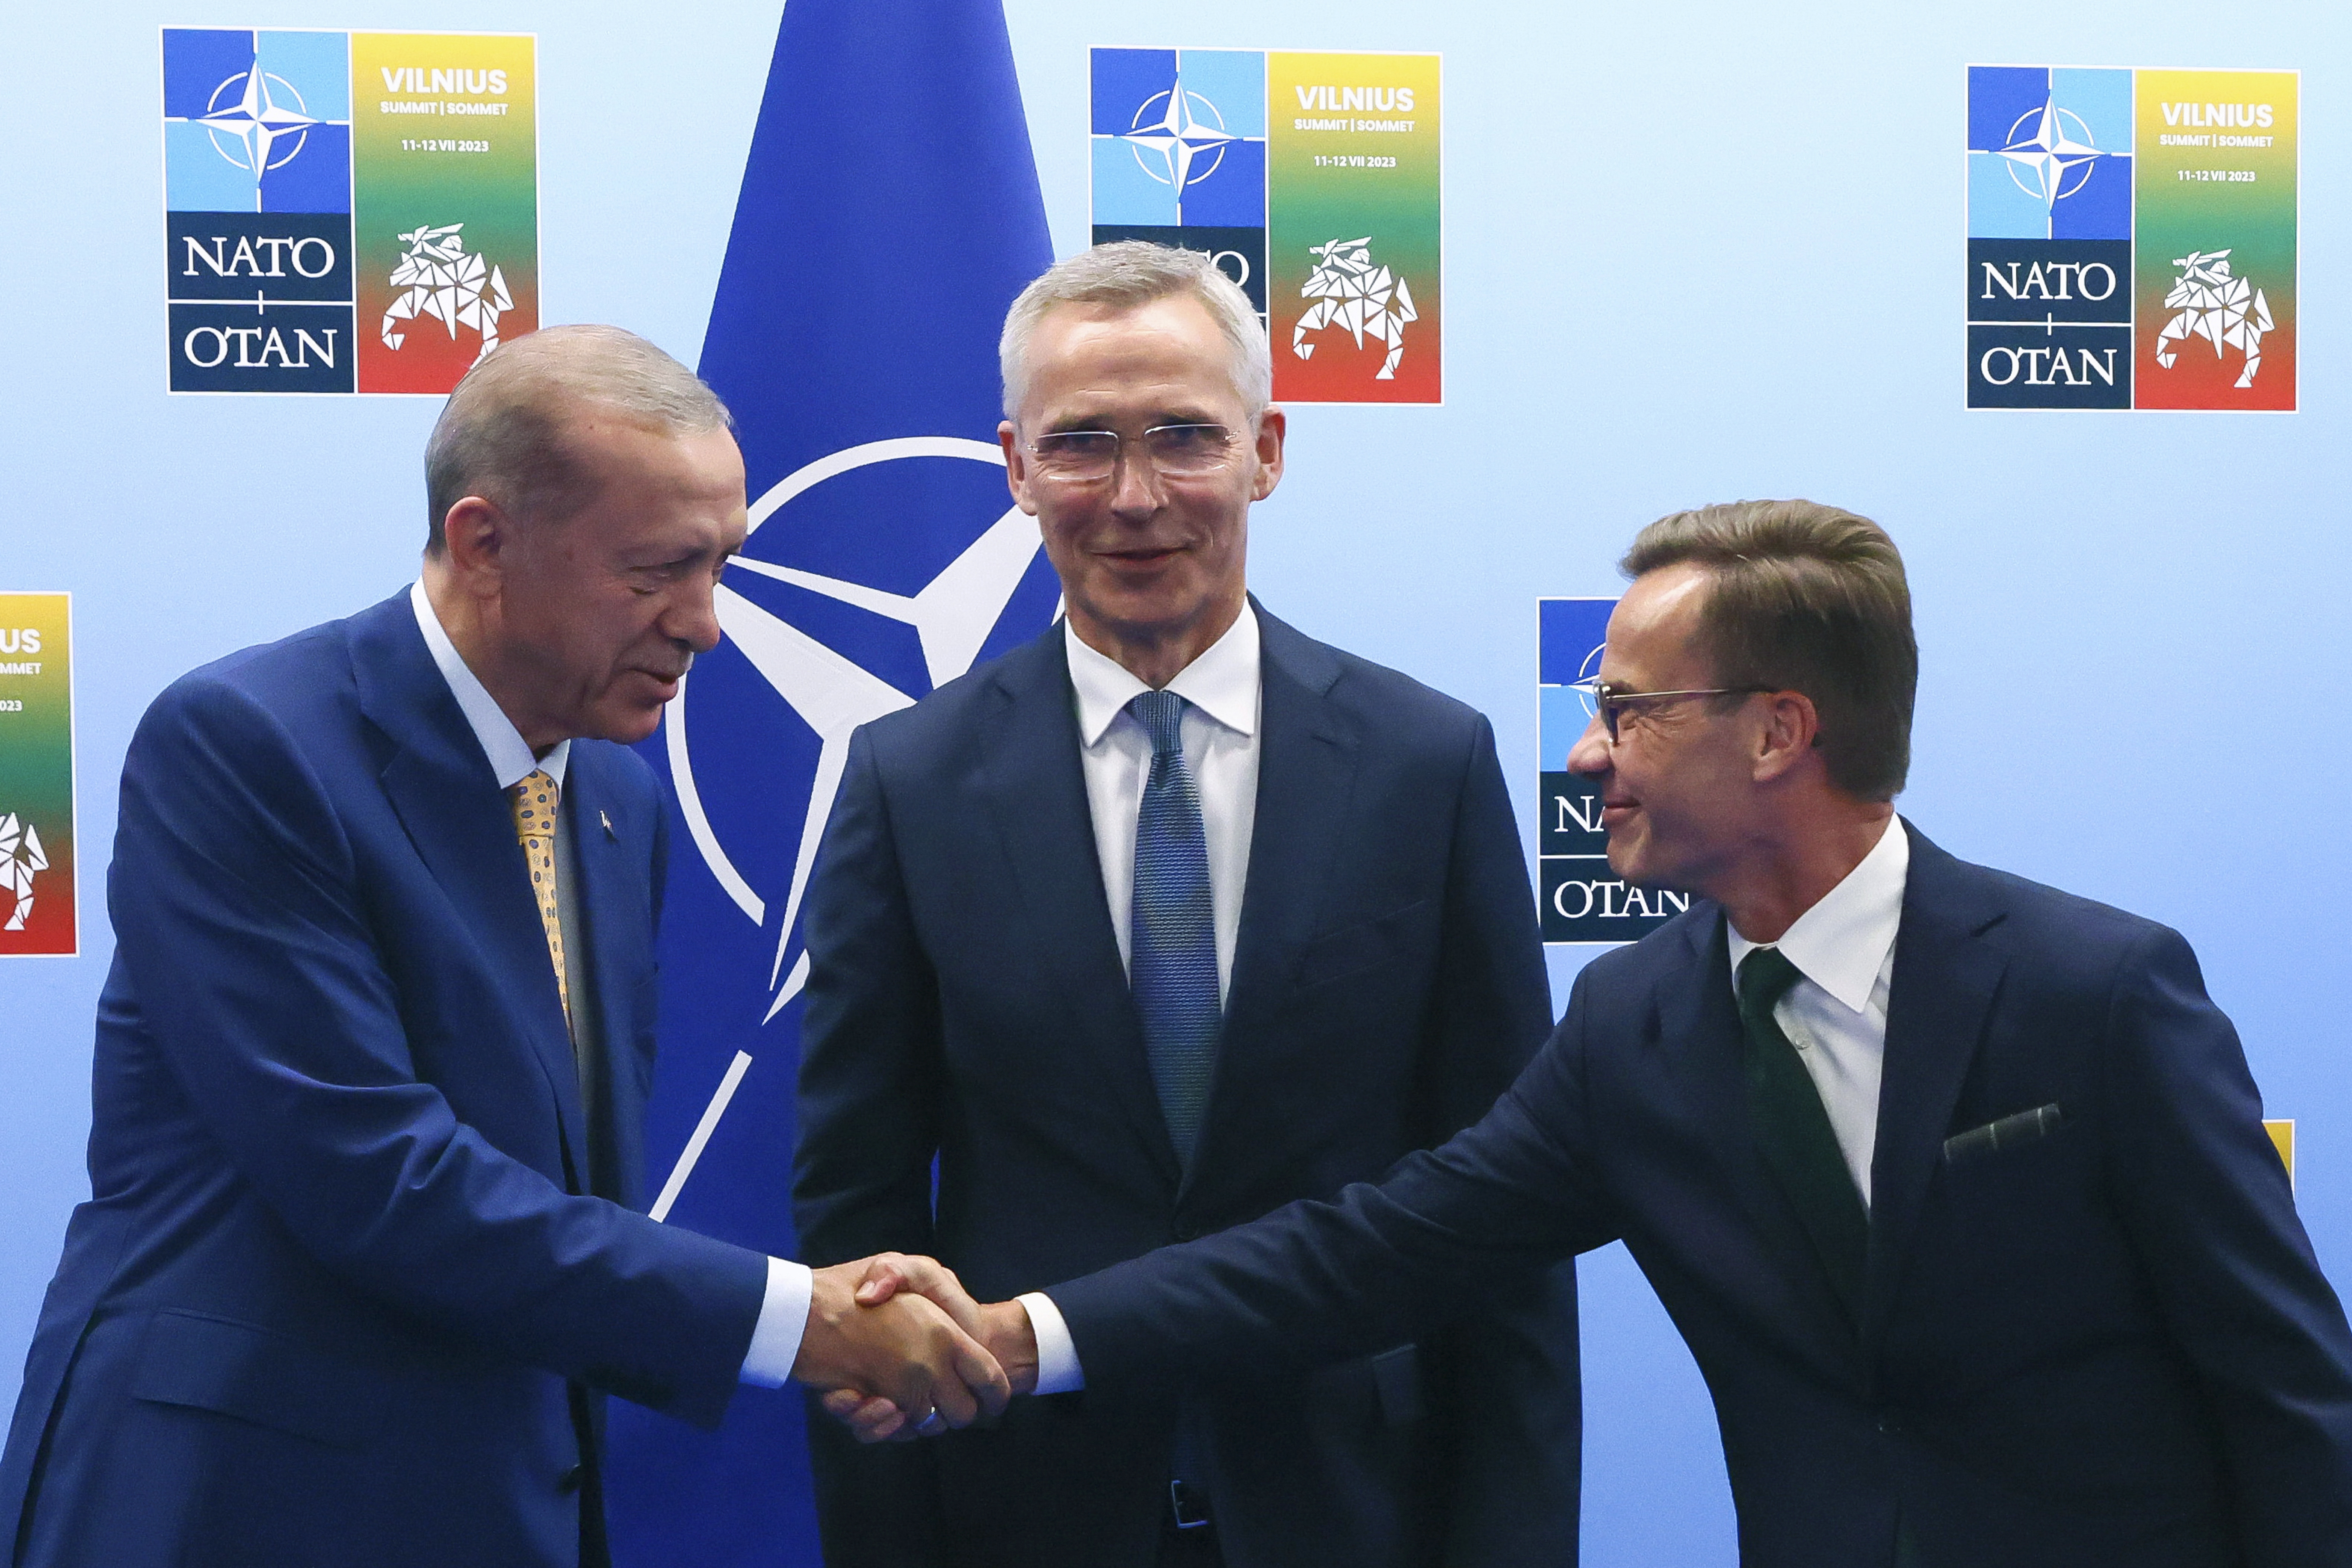 Sweden in NATO: A Historic Day